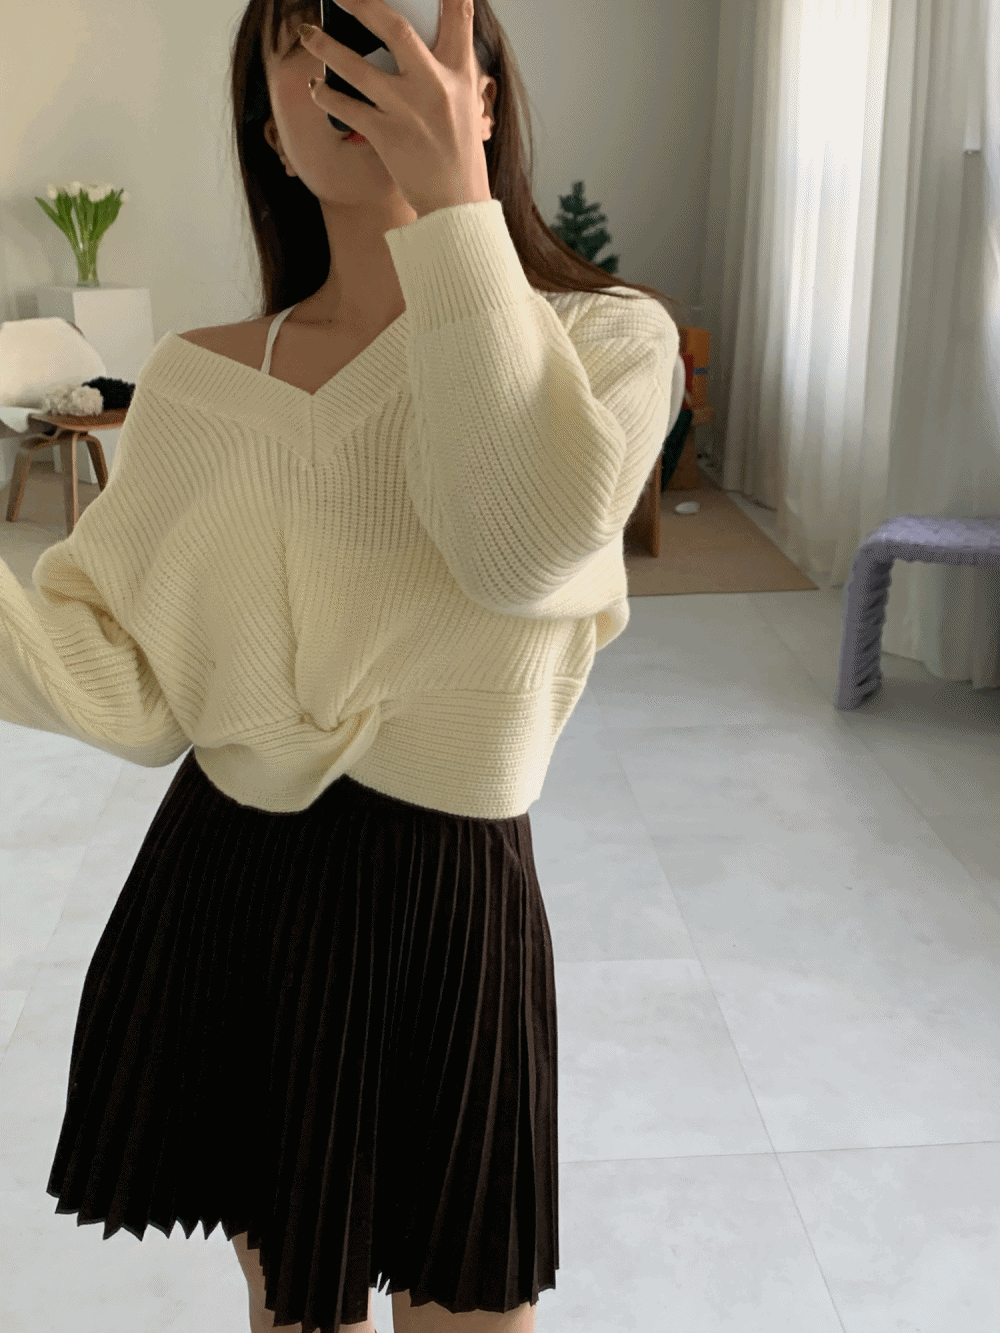 [Top] Twisted v-neck knit / 3 colors